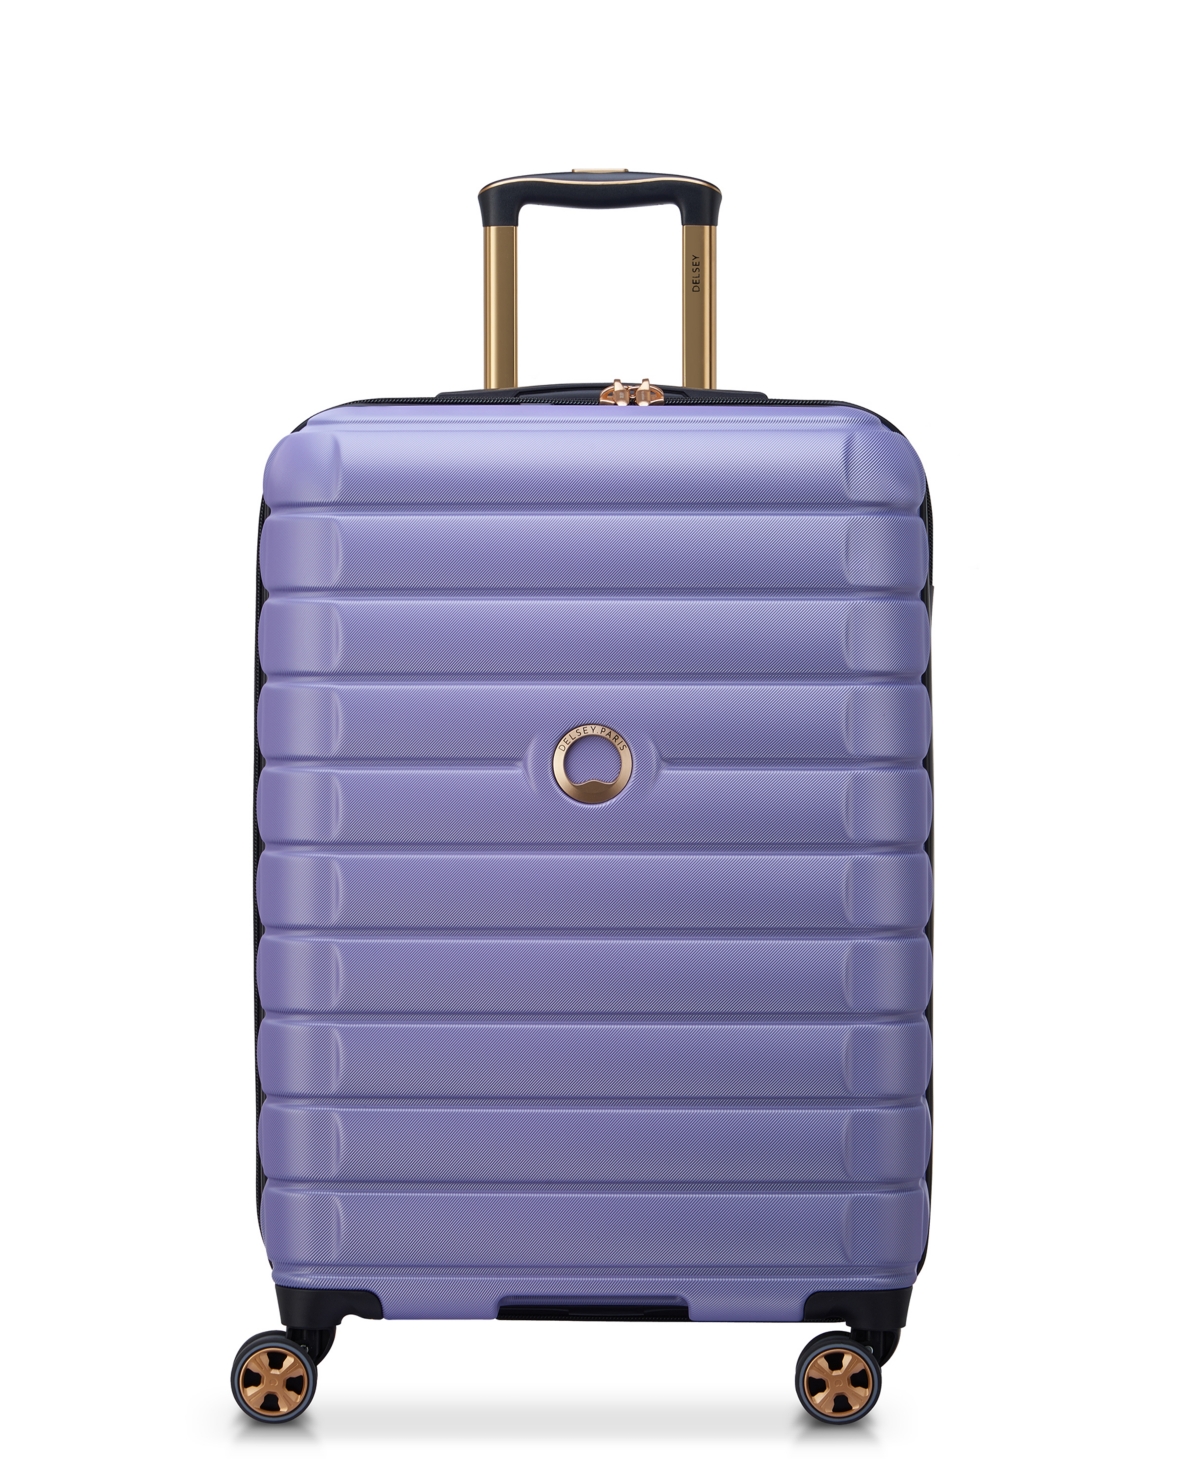 Shadow 5.0 Expandable 24" Check-in Spinner Luggage - Lilac